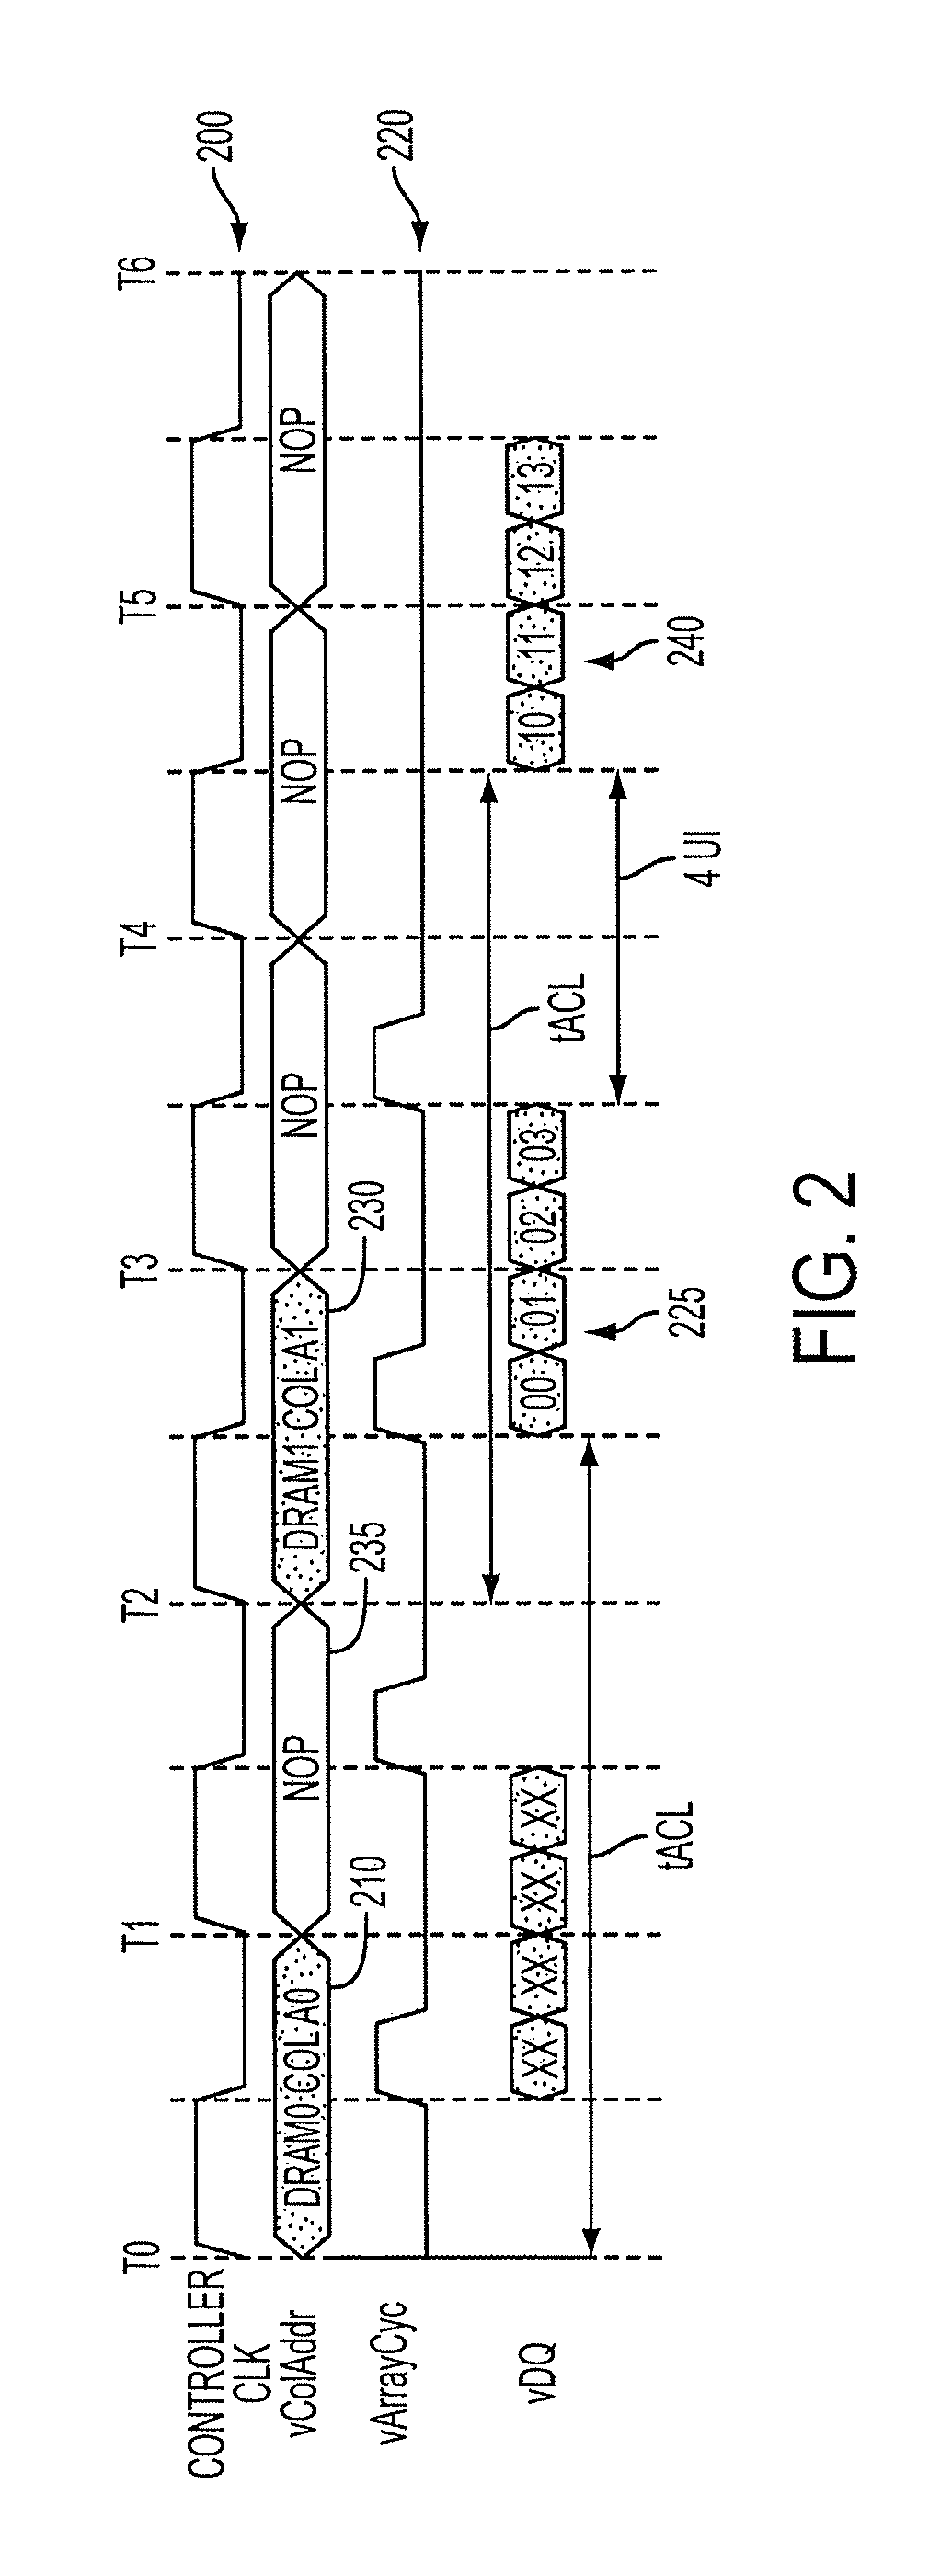 Memory systems and methods for controlling the timing of receiving read data